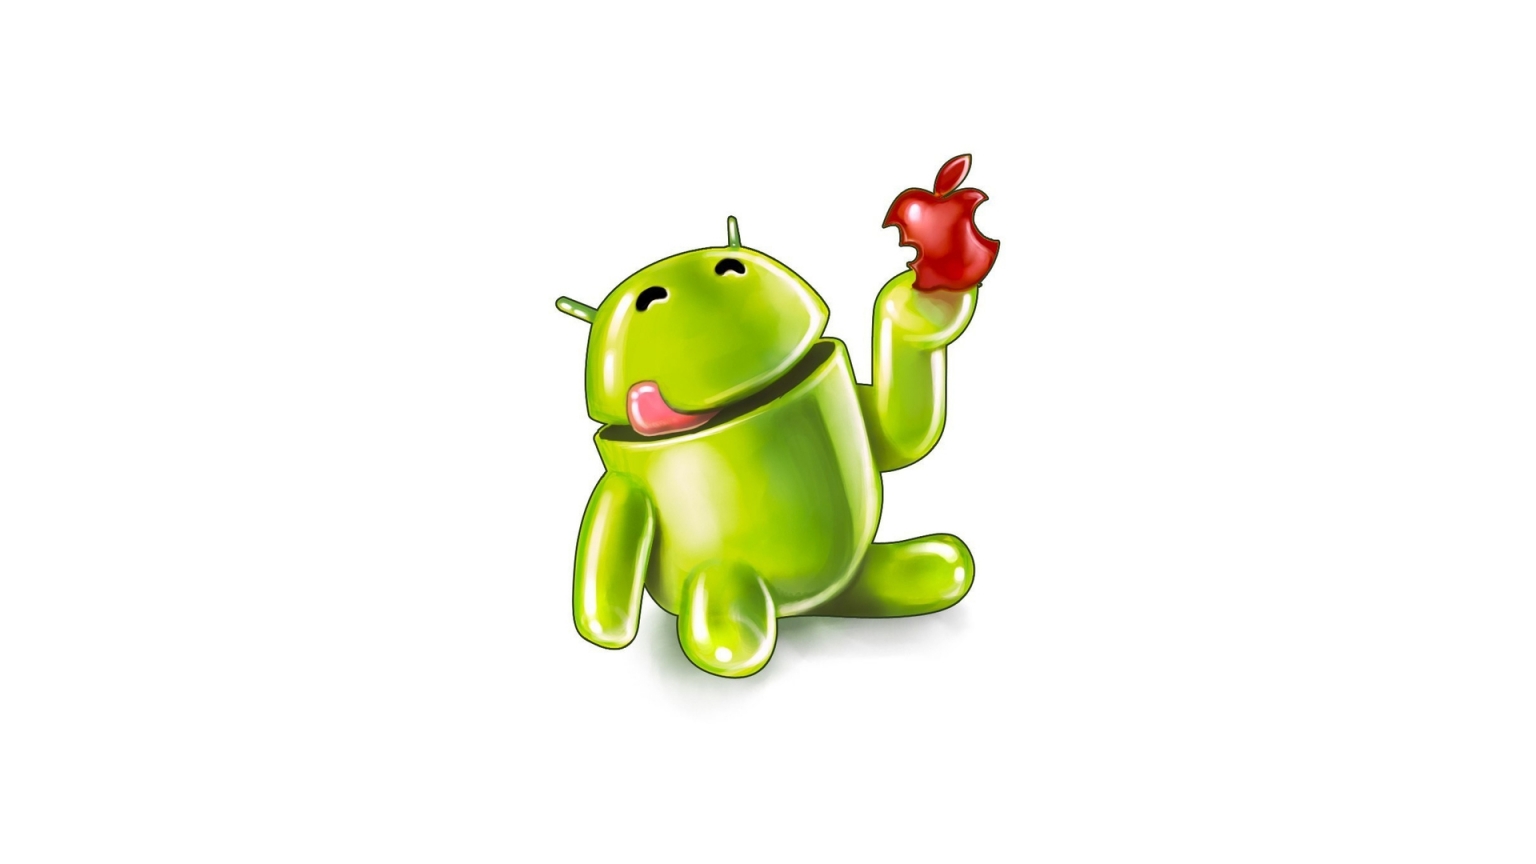 Android Eating Apple for 1536 x 864 HDTV resolution